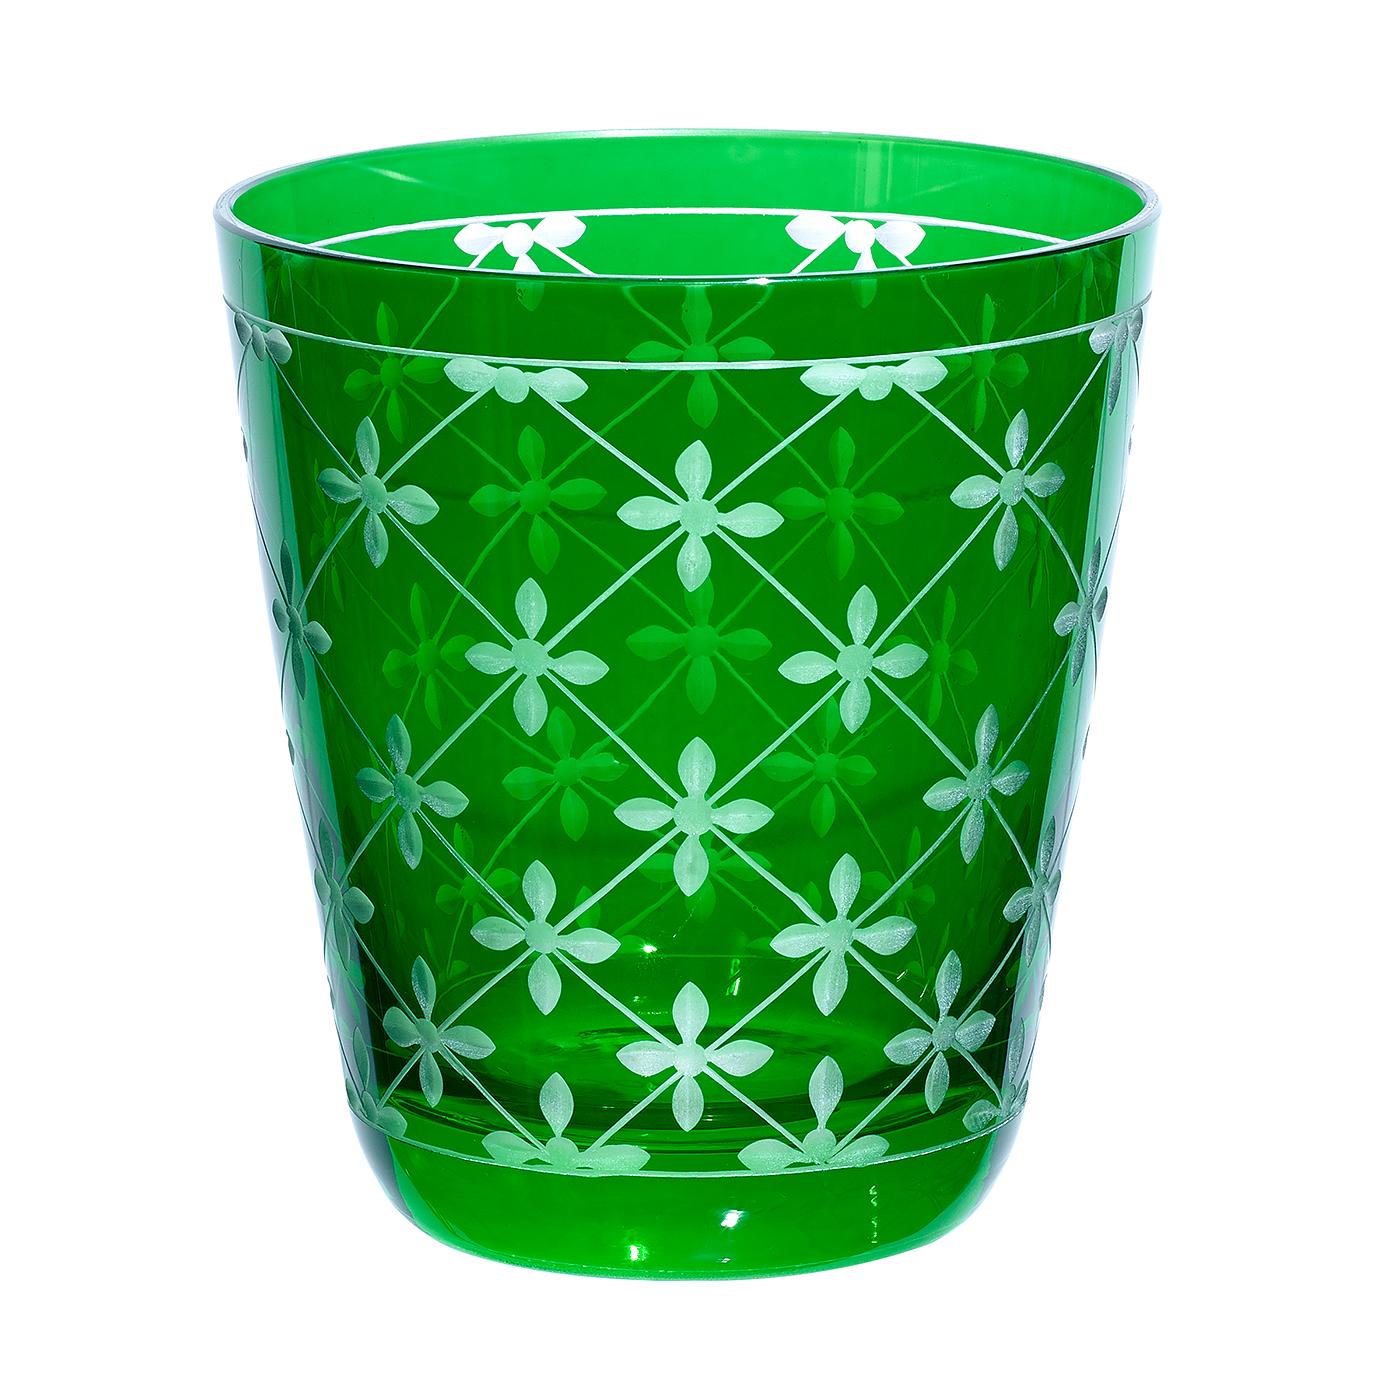 Set of 6 hand blown tumblers in green crystal with a country style decor all around. A matching carafe can be ordered in addition. Can be ordered in different colors like blue, pink and green. Not recommend for dishwasher use
About Sofina